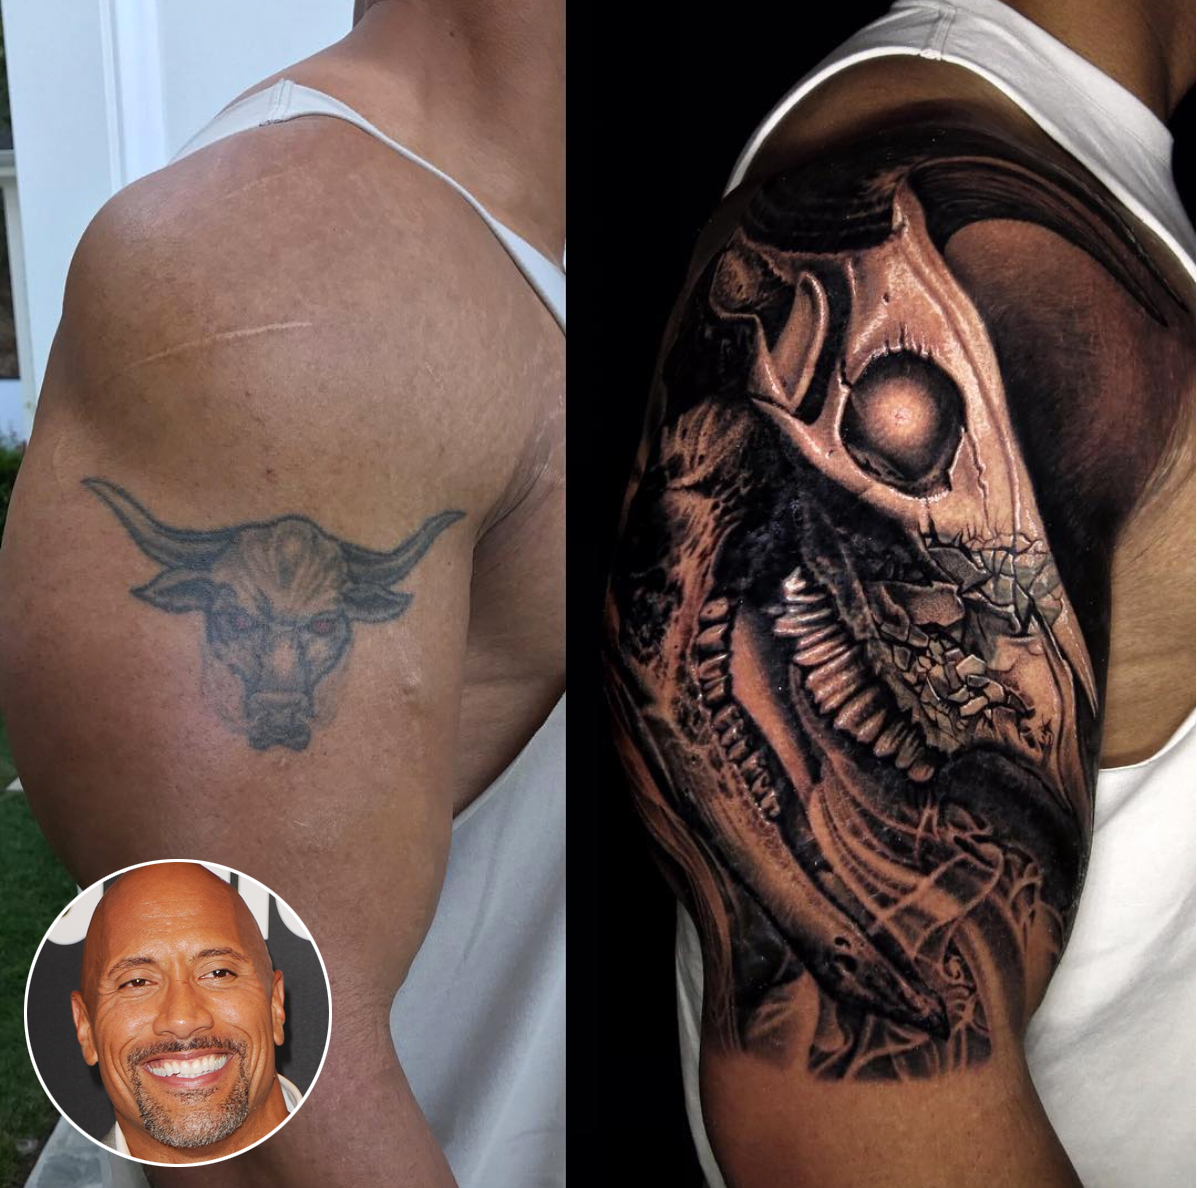 Dwayne The Rock Johnson Changed His Iconic Bull Tattoo People within sizing 1197 X 1188